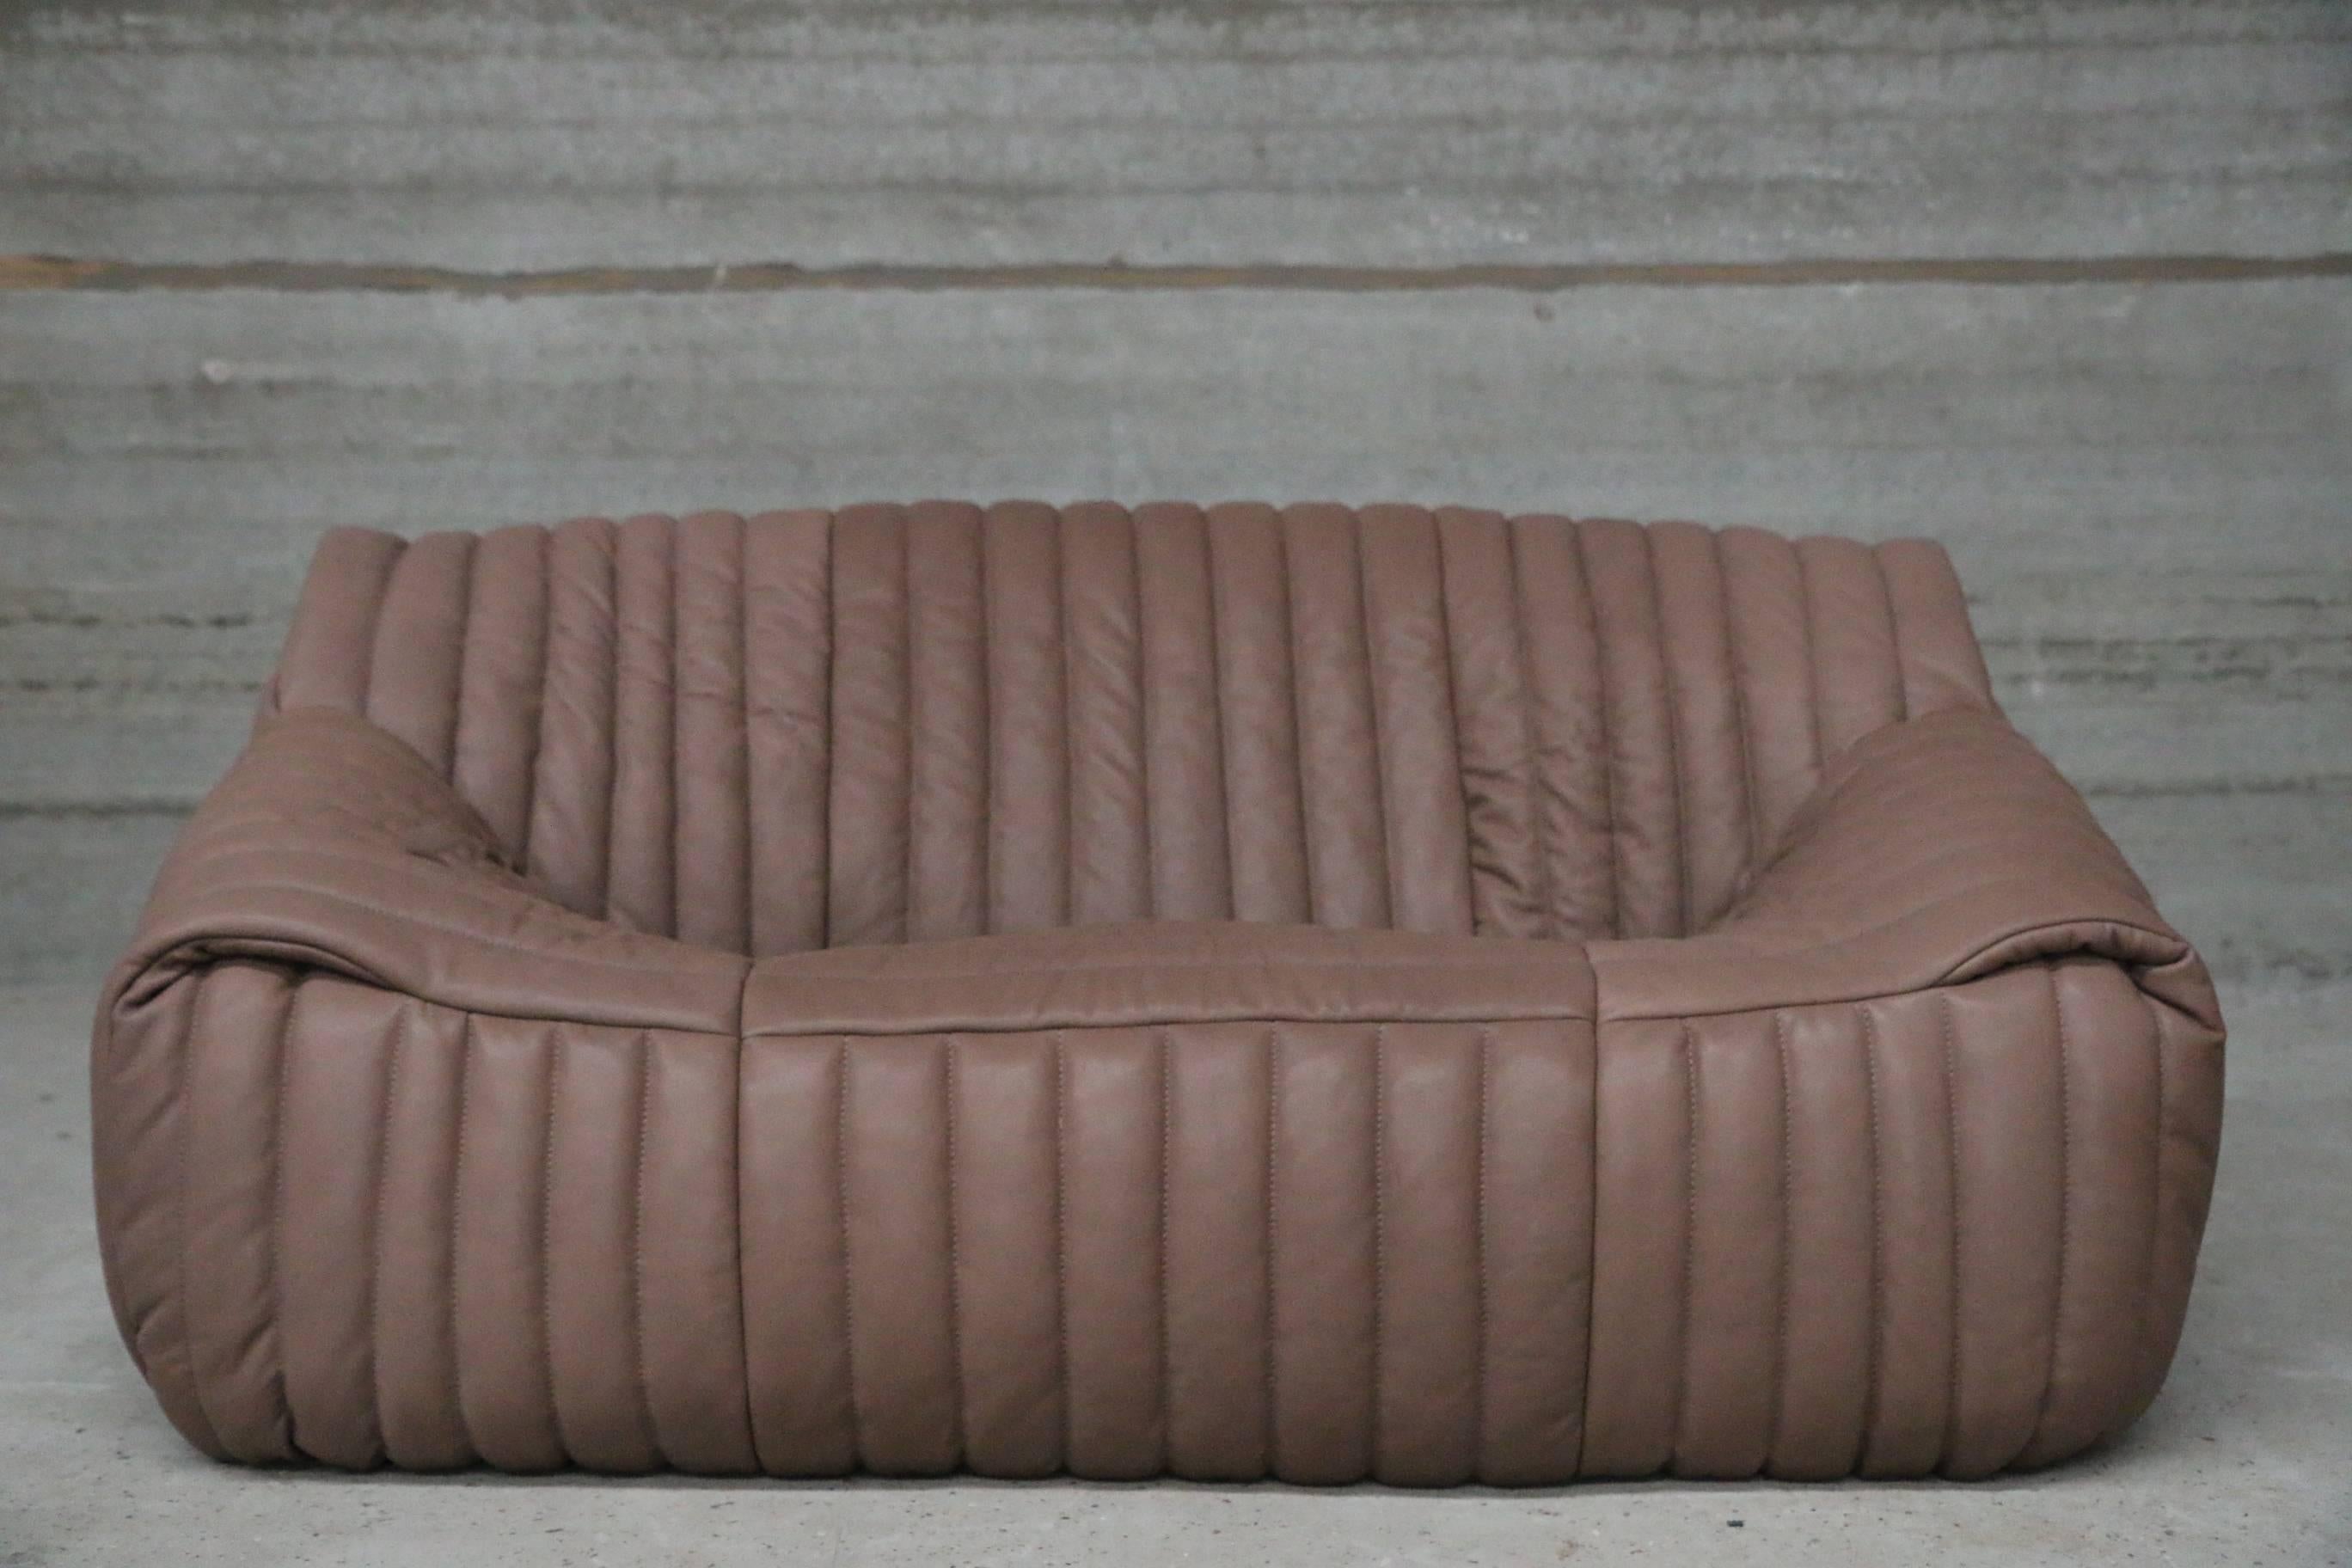 Designed by Annie Hieronimus for Cinna (Ligne Roset) France, circa 1977
Re-upholstered in beautiful full grain leather. Vison color
Model name Sandra.